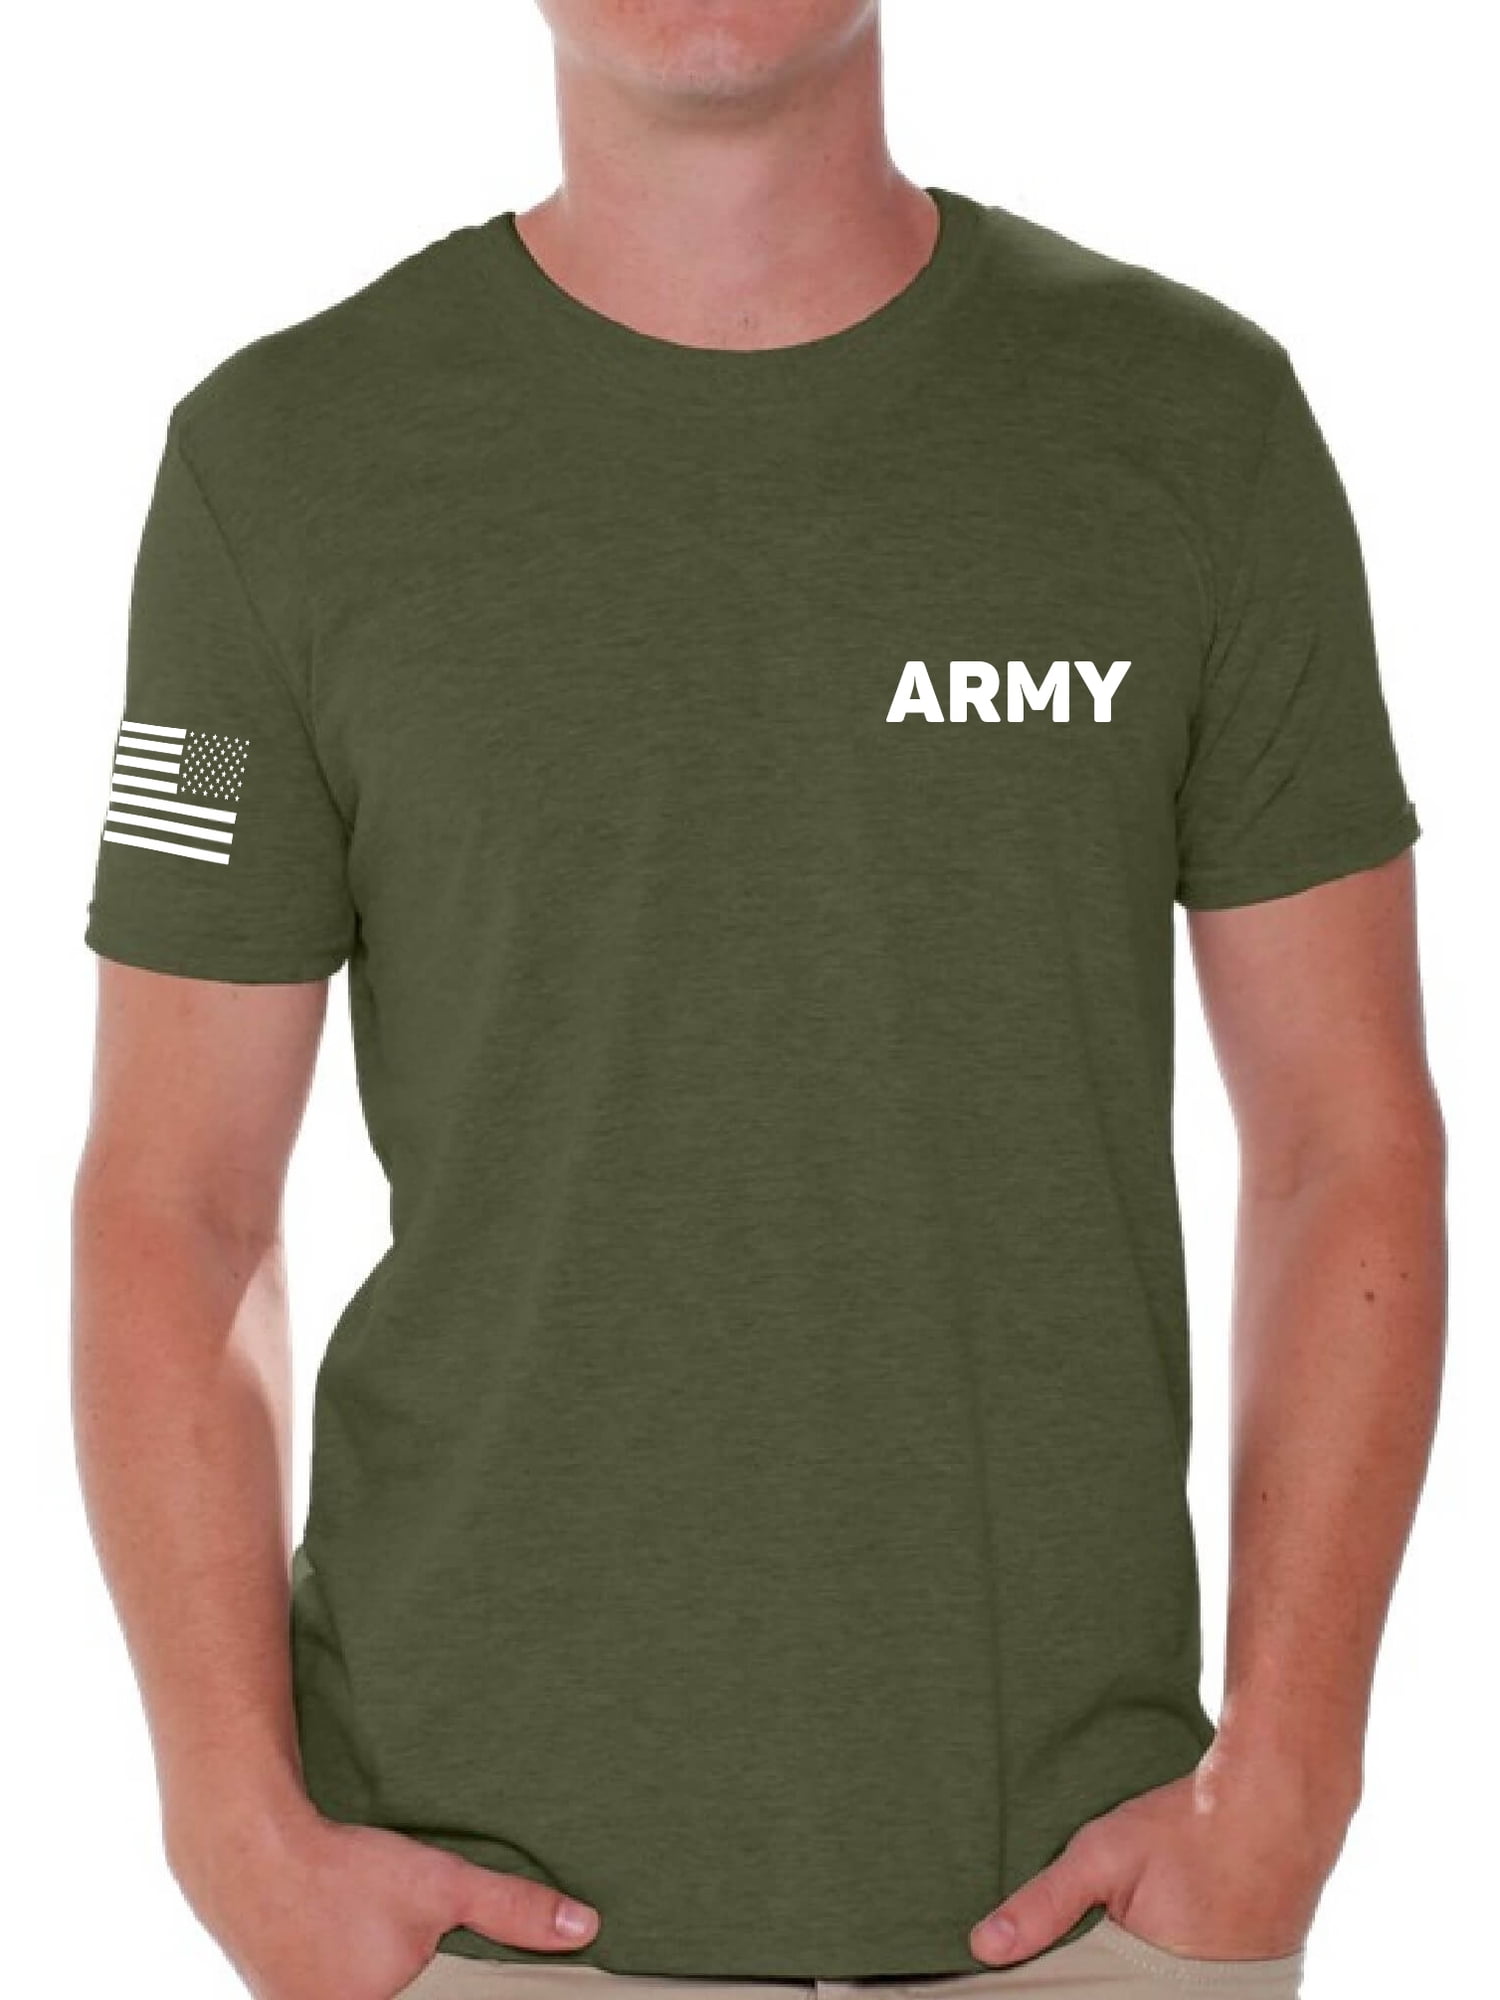 army t shirt for man